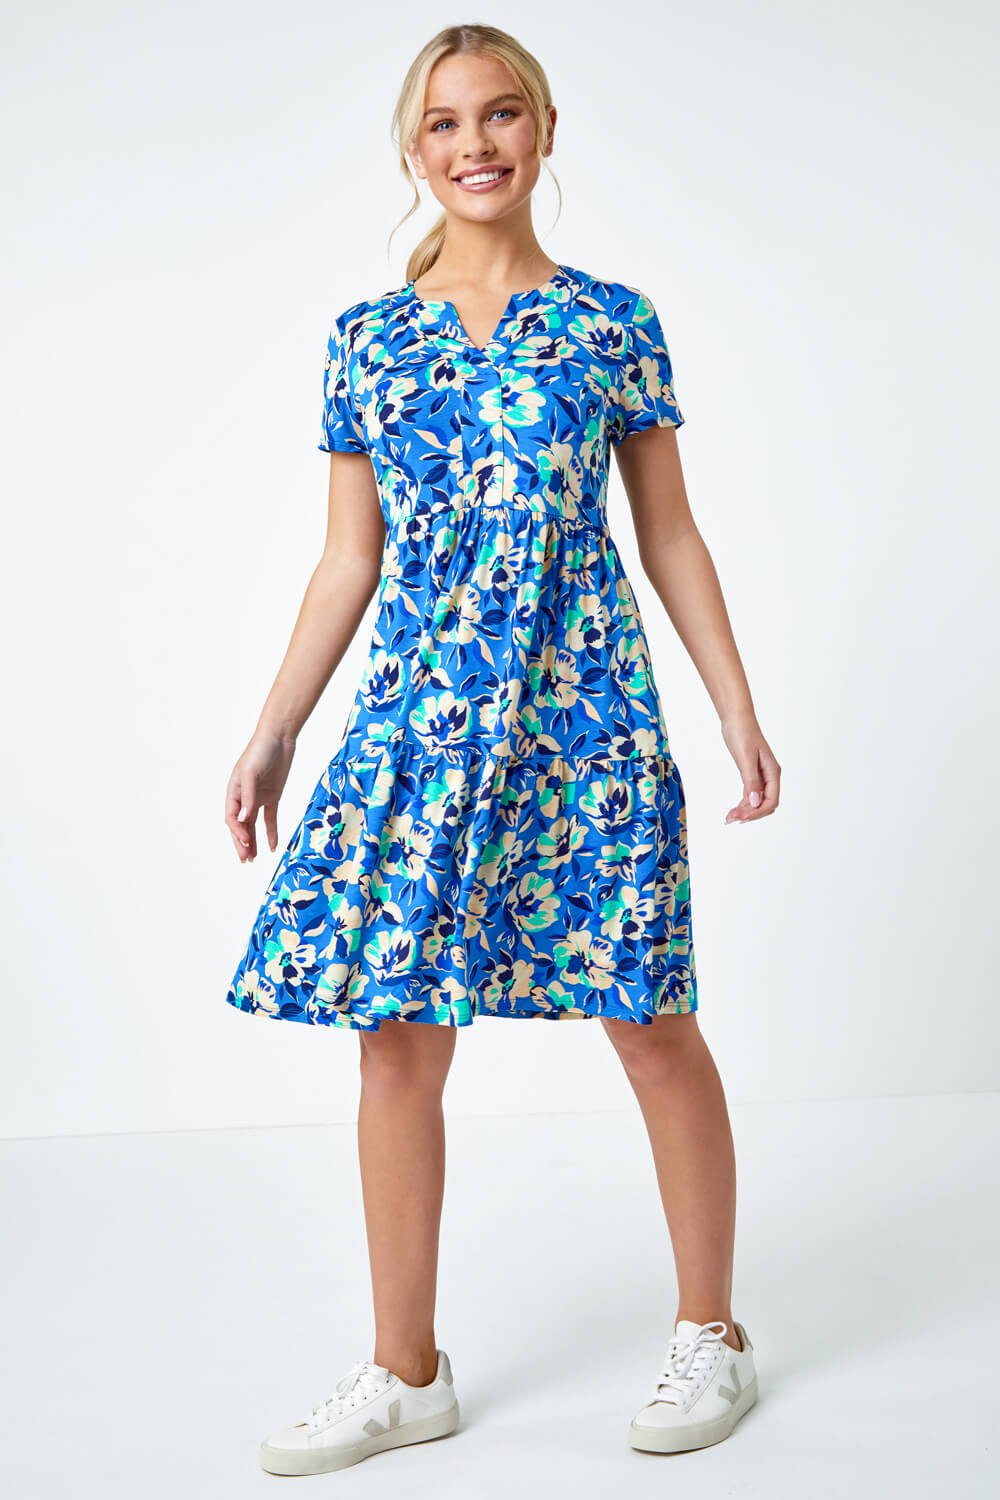 Turquoise Petite Tiered Floral Stretch T-Shirt Dress, Image 2 of 5